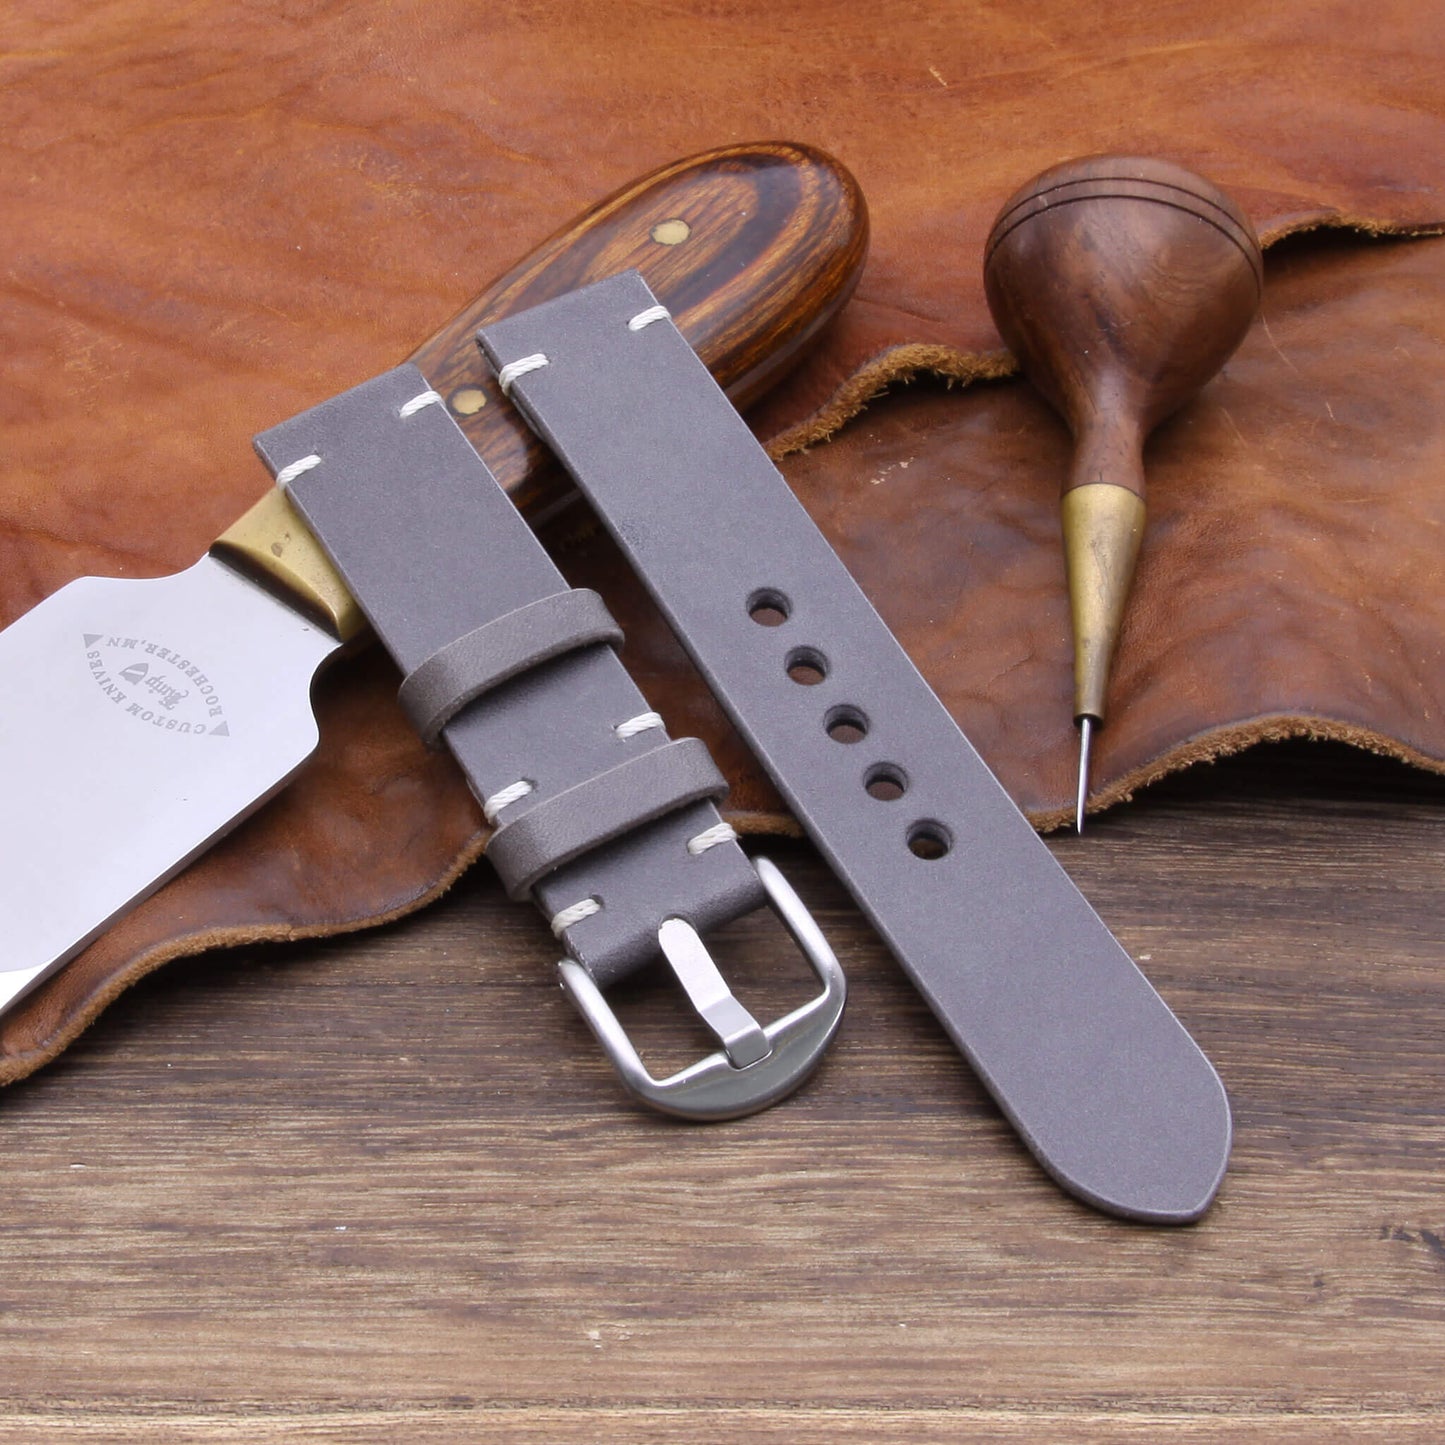 3rd View of 2-Piece Minimalist Leather Watch Strap, made with Koala Antracite Italian veg-tanned leather by Cozy Handmade